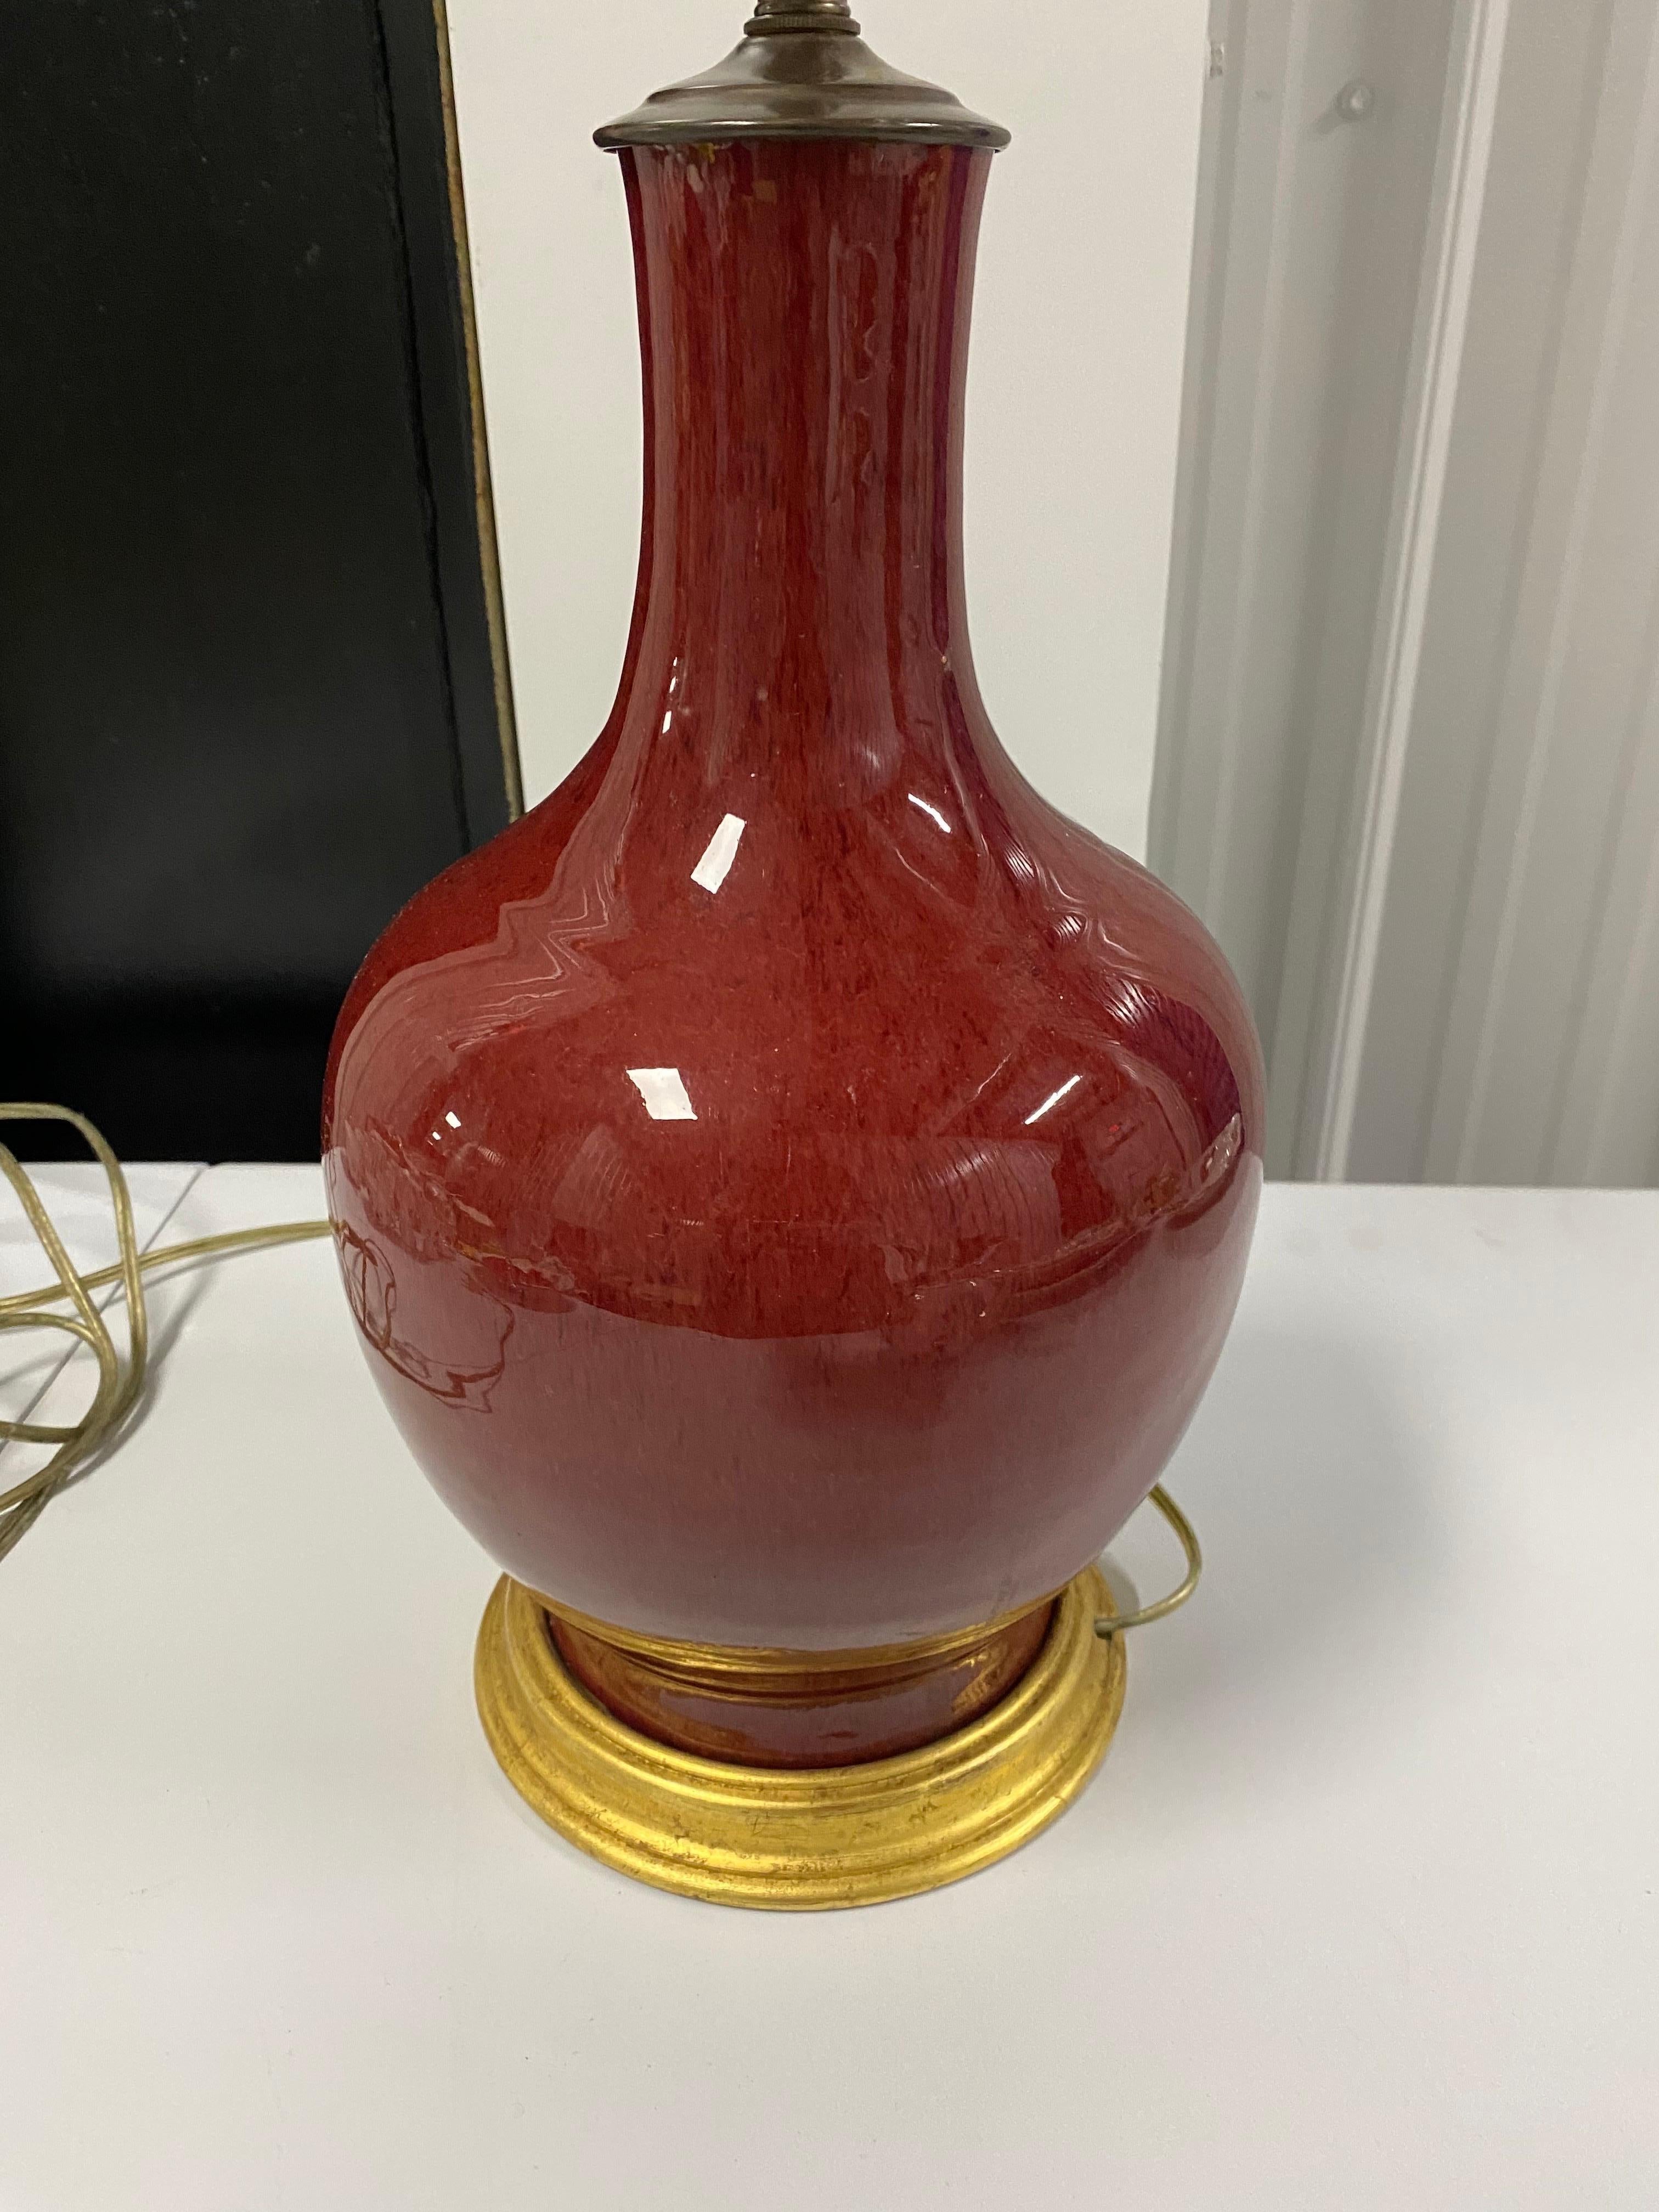 One Chinese Sang-de-Boeuf glazed red vase, c. 19th century, made into a lamp. Round bulbous gourd form with an elegant clean neck glazed in deep red glaze. The vase is antique with a later gilded wooden base and lighting components added. Also